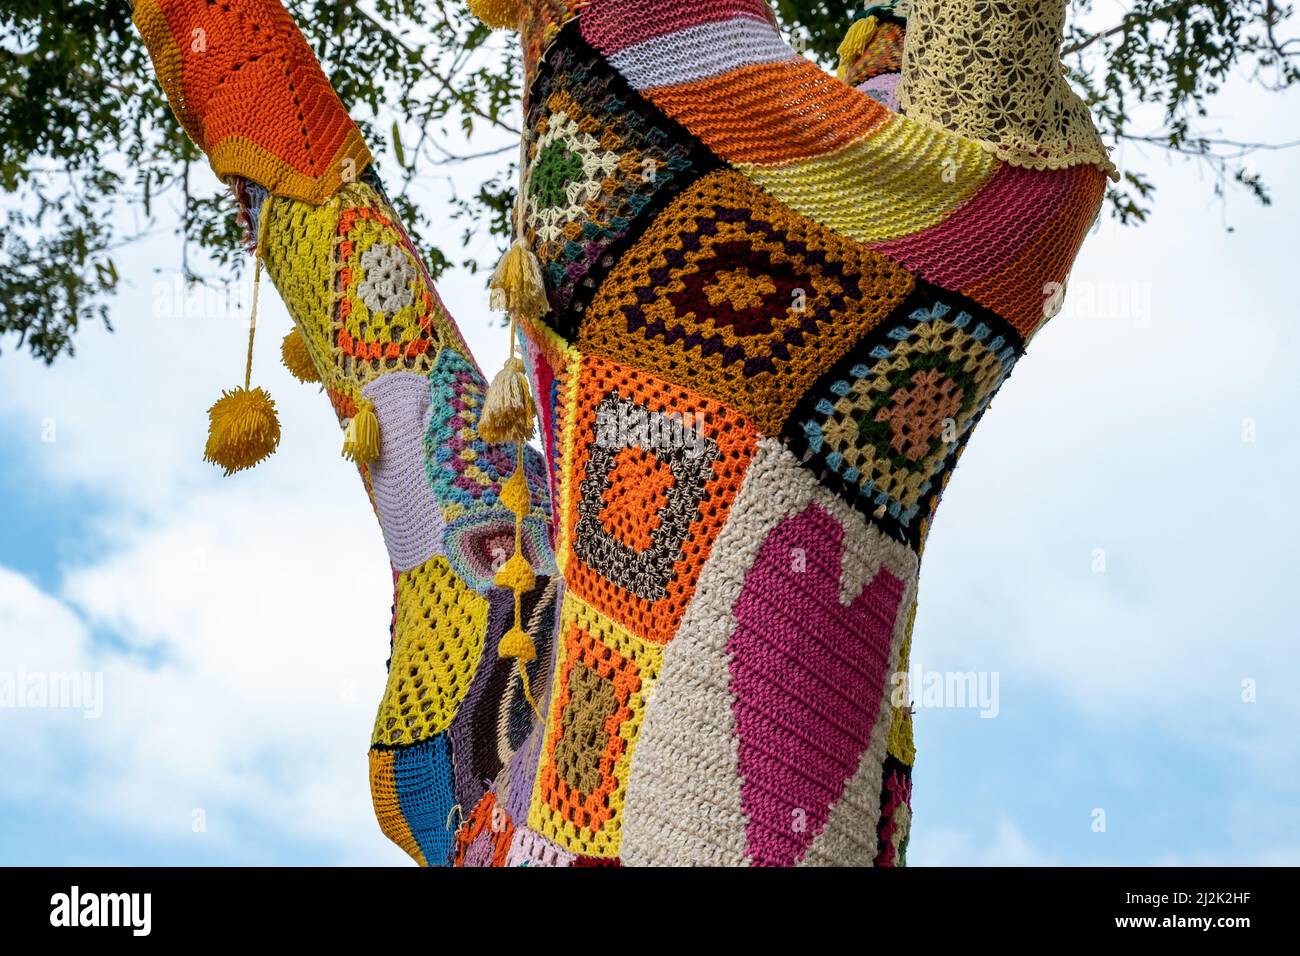 https://c8.alamy.com/comp/2J2K2HF/colorful-crochet-knit-on-a-tree-trunk-yarn-bombing-patchwork-knitted-crochet-covered-tree-for-warmth-protection-and-decoration-high-resolution-2J2K2HF.jpg